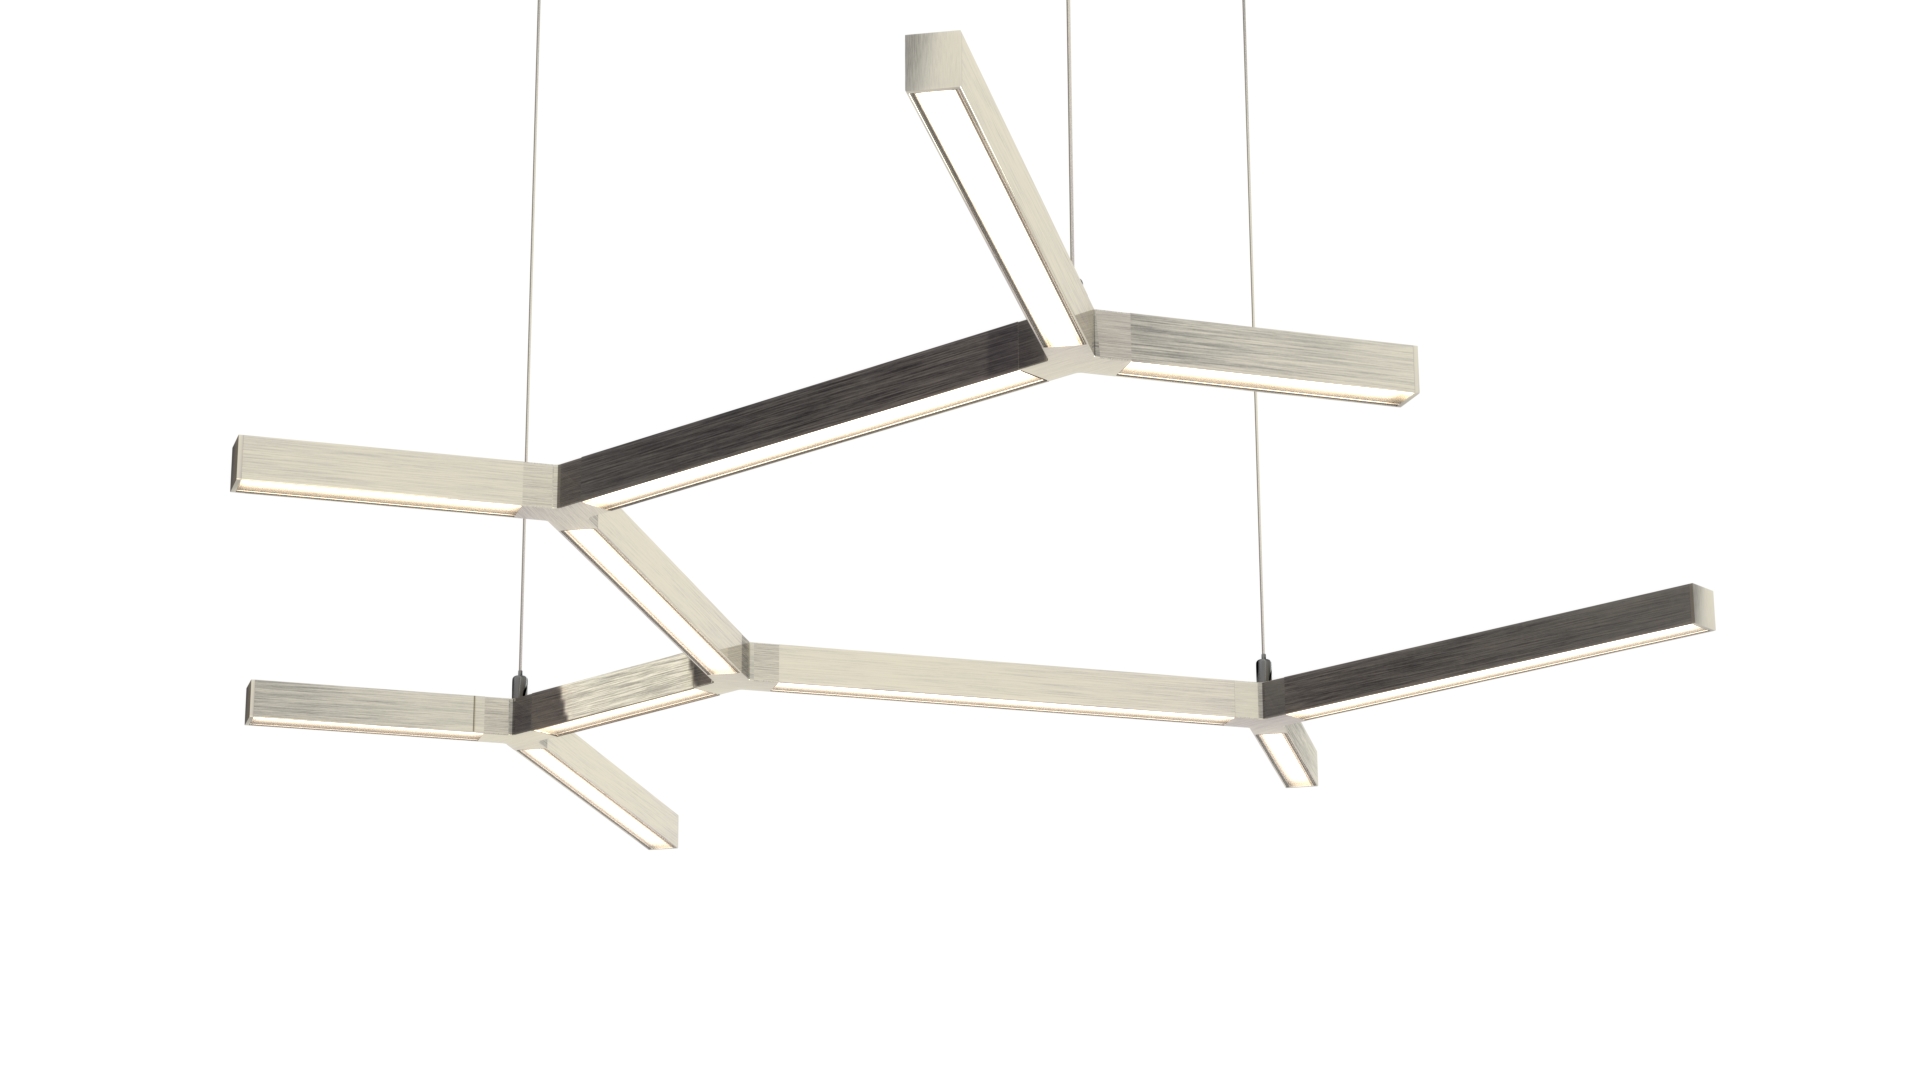  Created new  joints  to allow customizable fixtures using Modulightor’s extrusion system. 